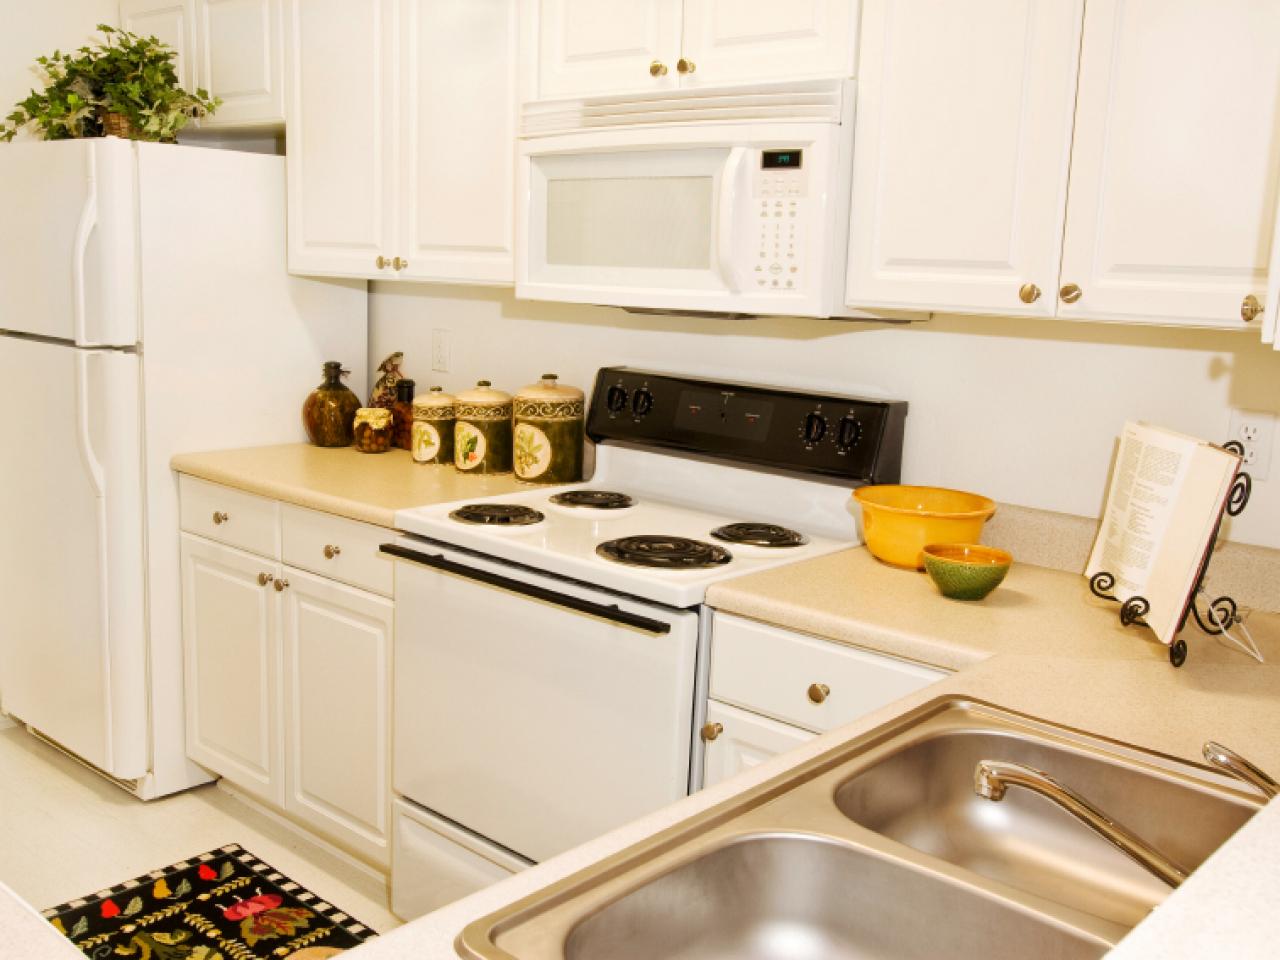 Kitchen Remodeling Where To Splurge Where To Save HGTV